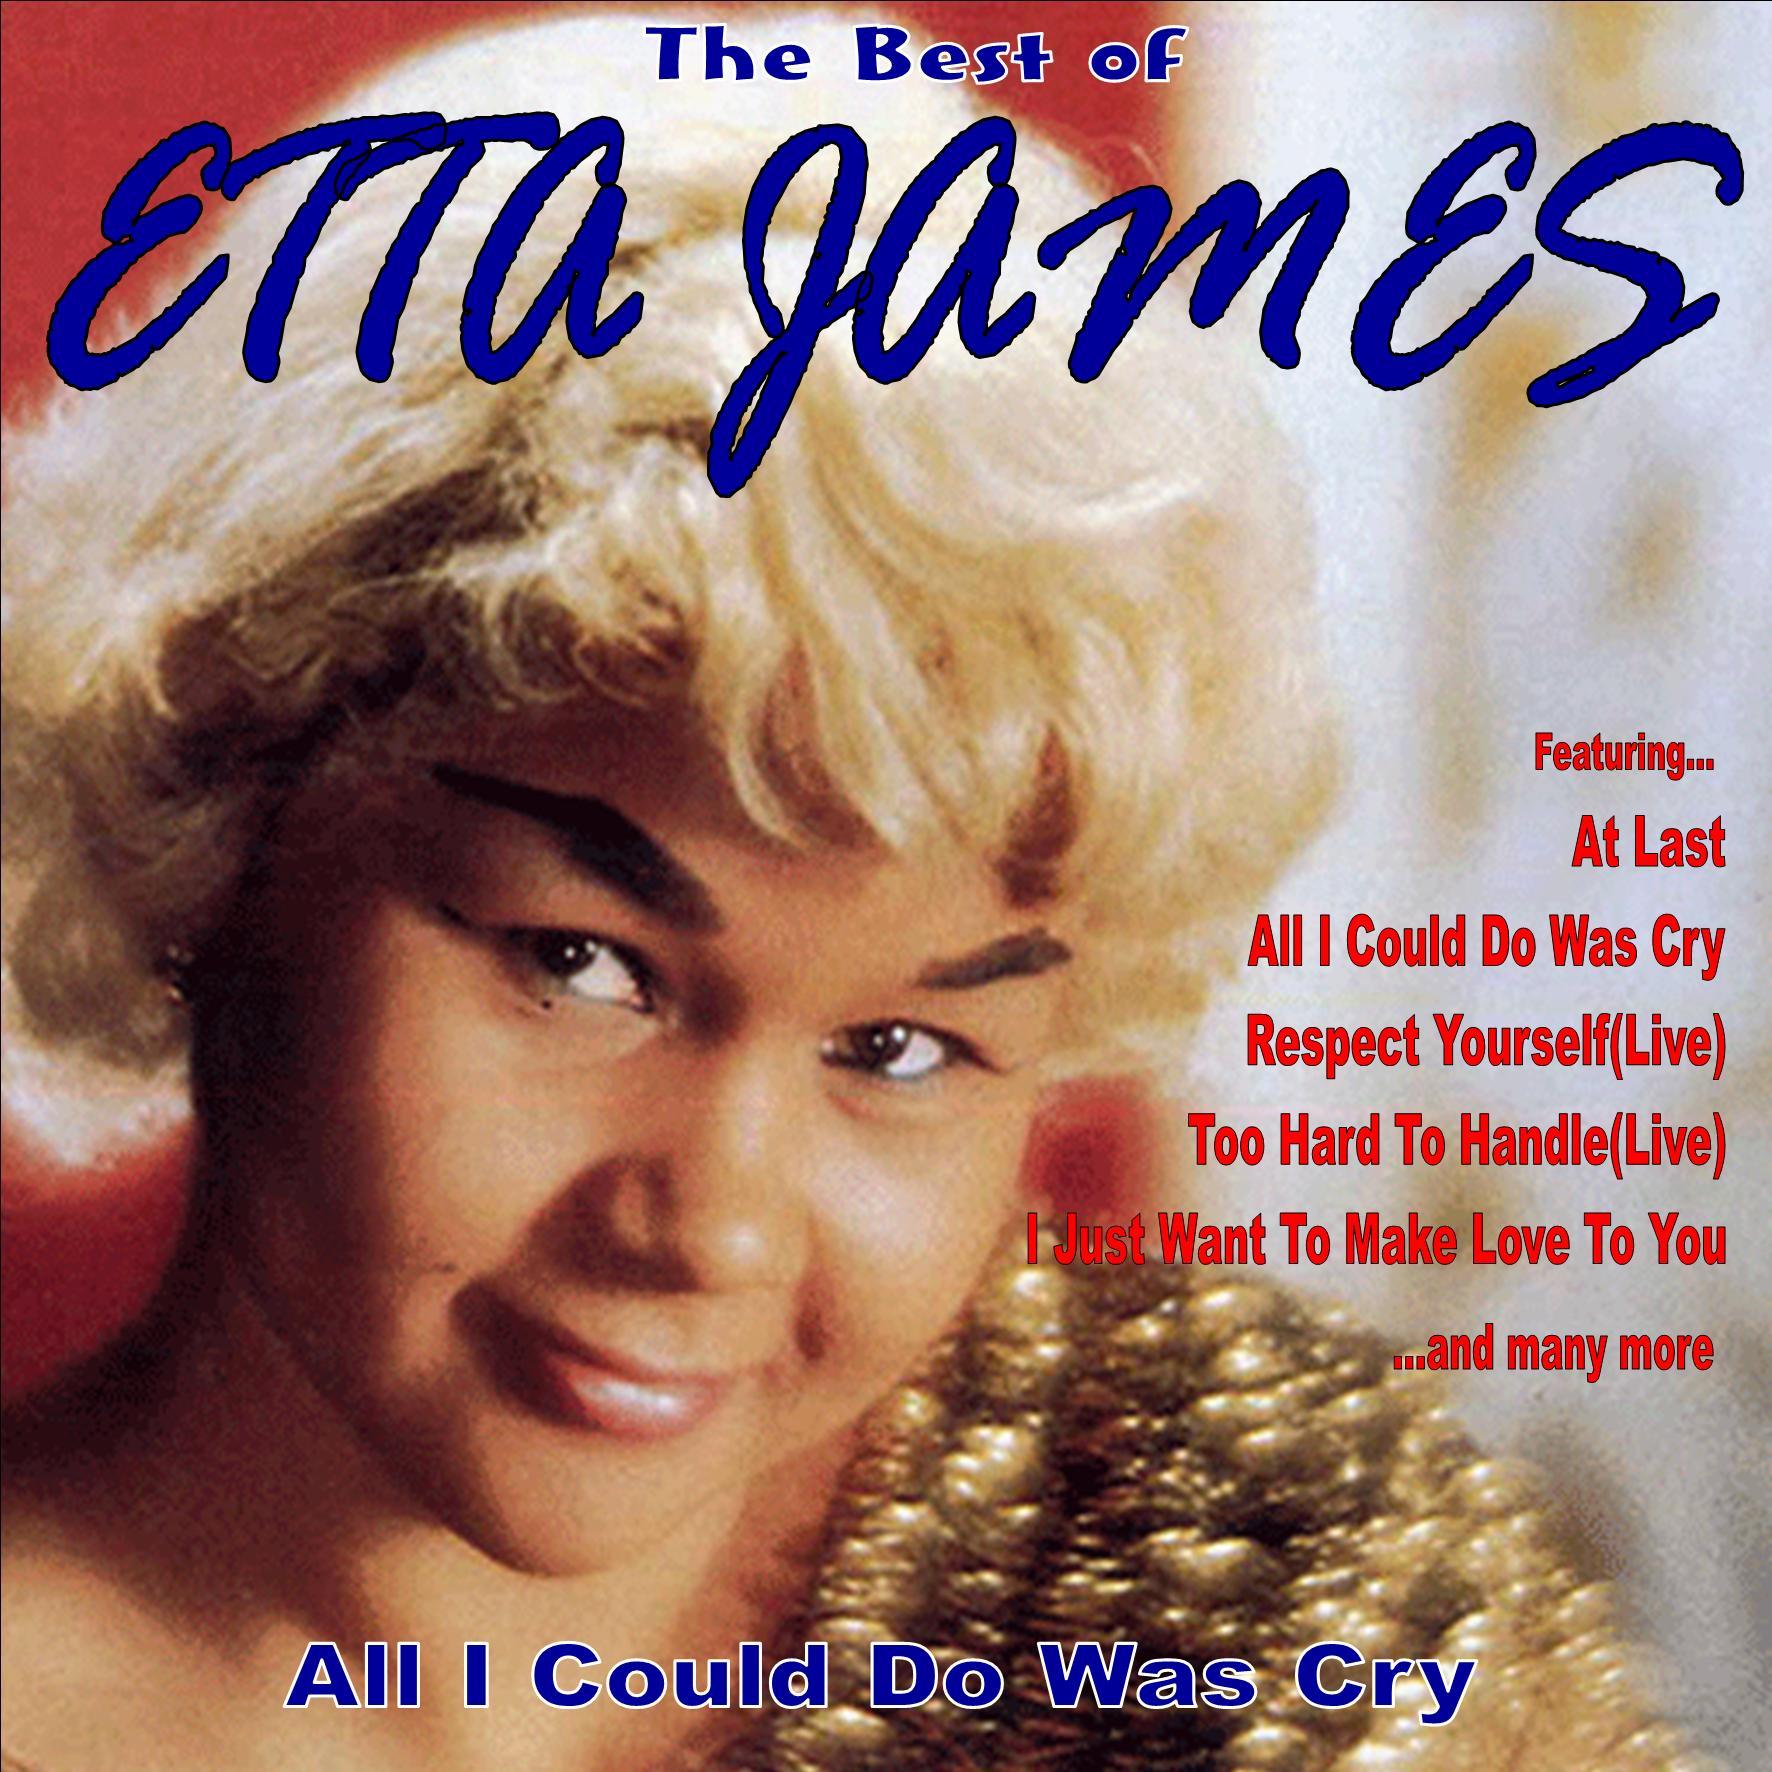 All I Could Do Was Cry: The Best of Etta James